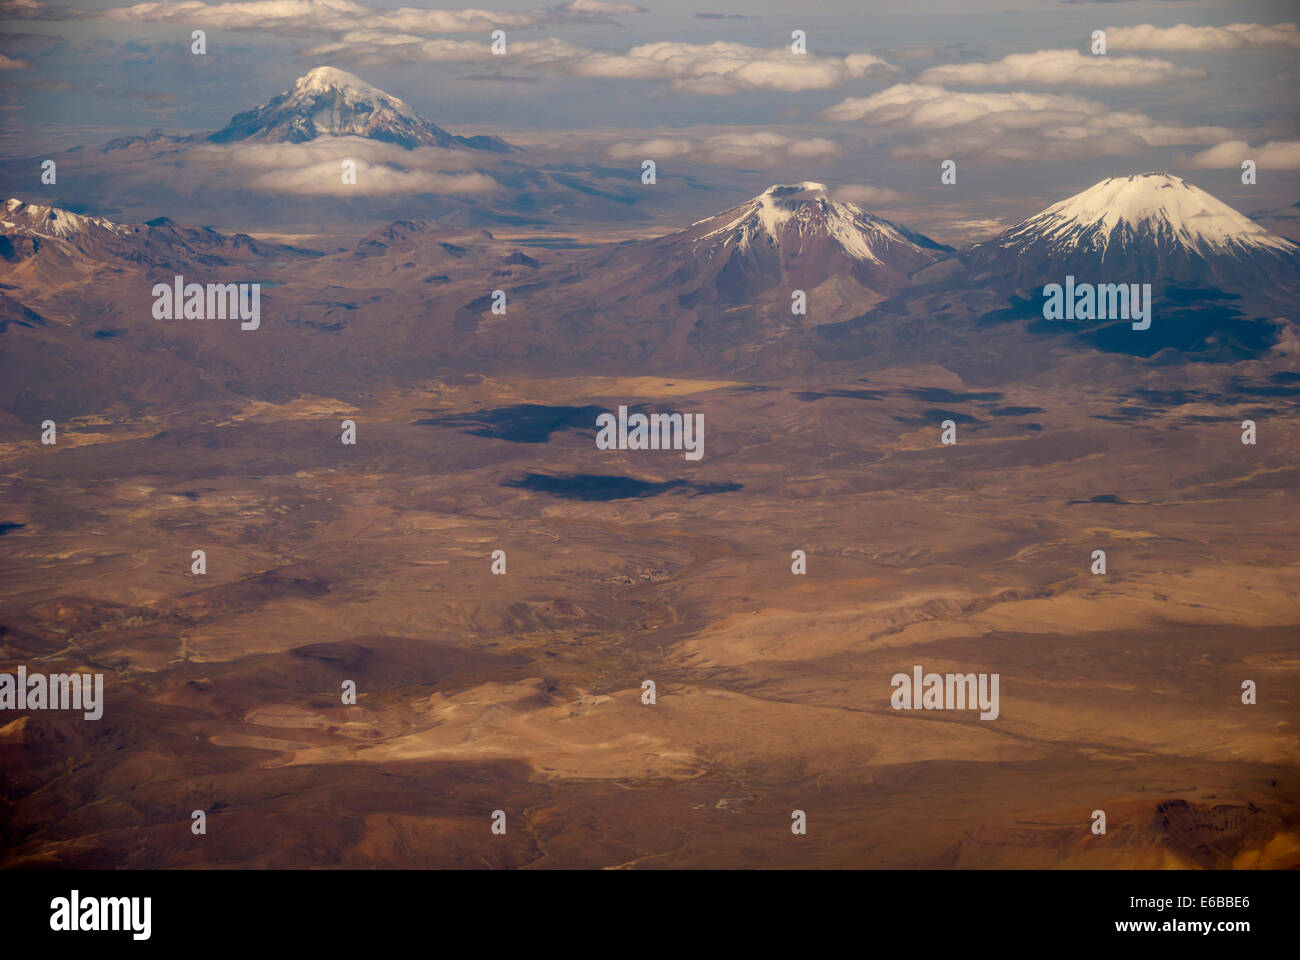 Bolivia, Chile, Inland, the Western Range or Cordillera Occidental, with volcanoes and high peaks Stock Photo